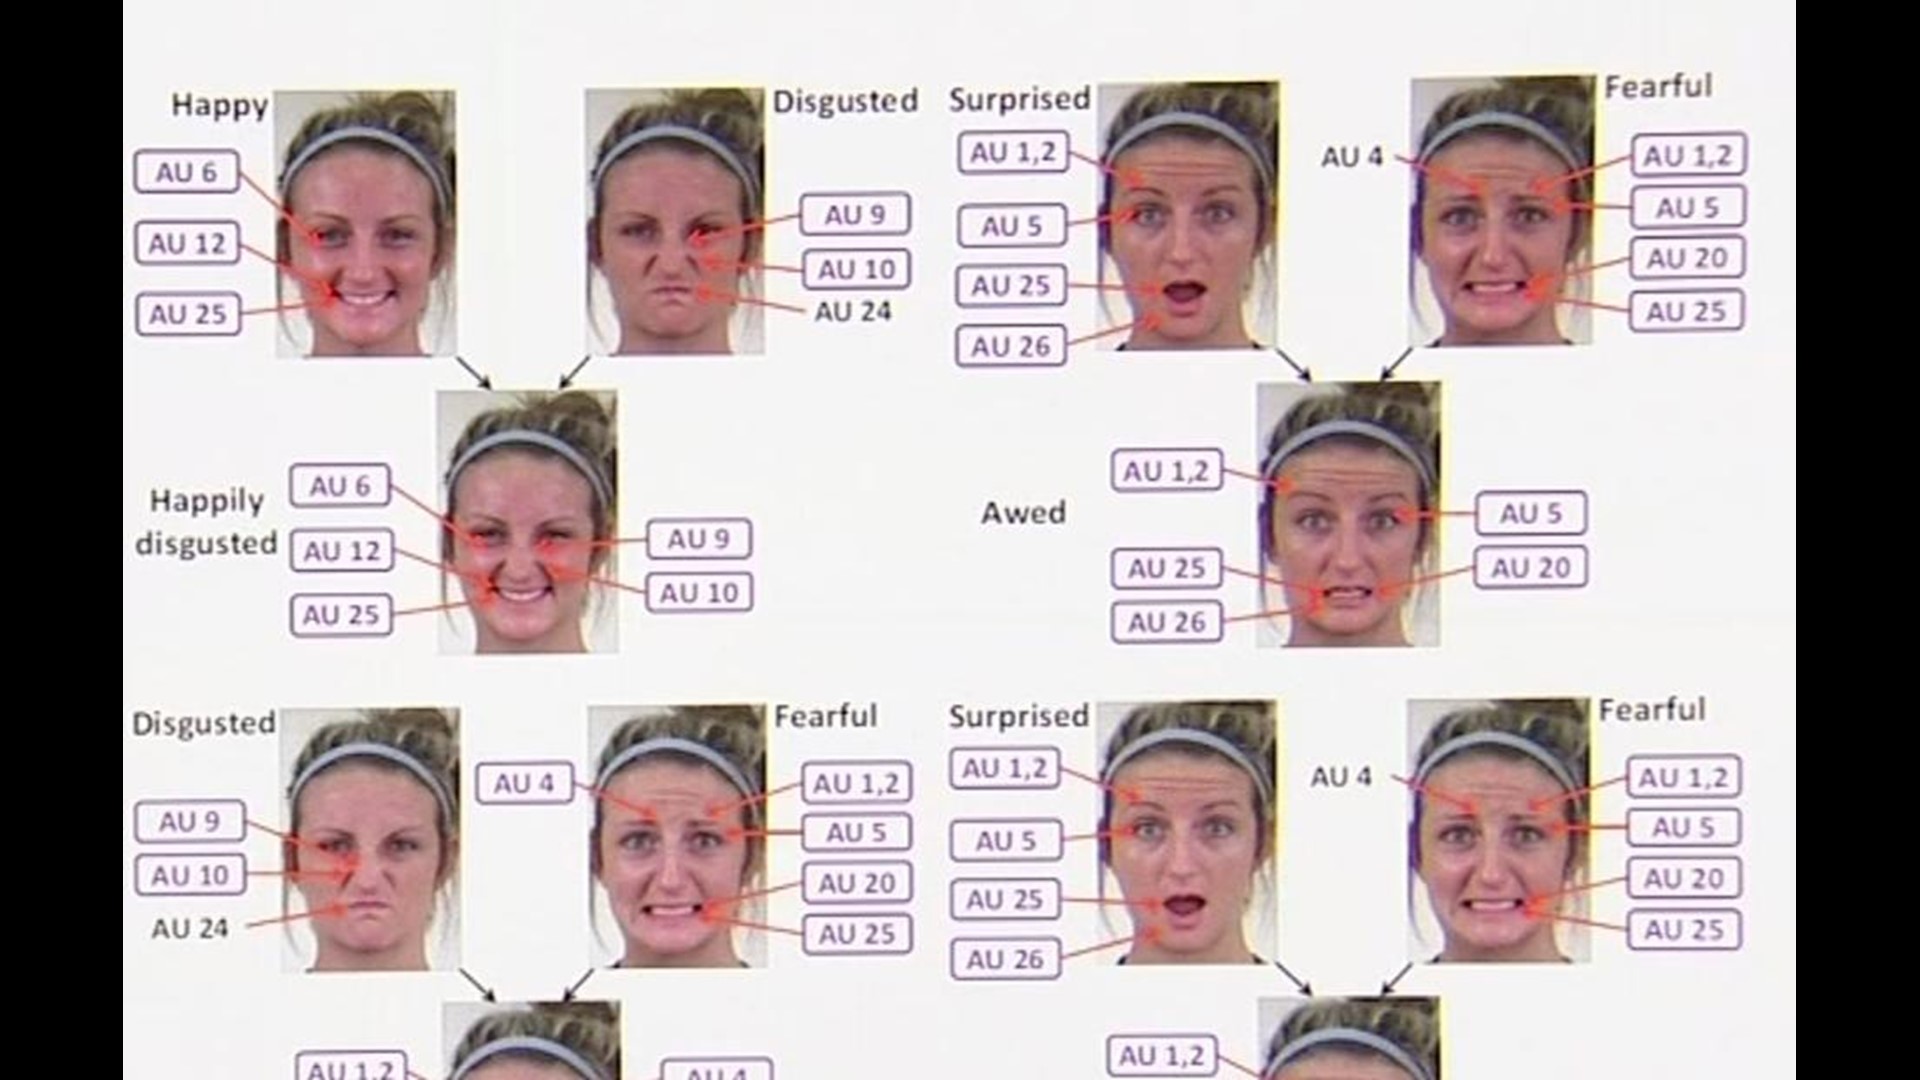 Ohio State University Scientist Studies Facial Expressions In Hopes Of Treating PTSD